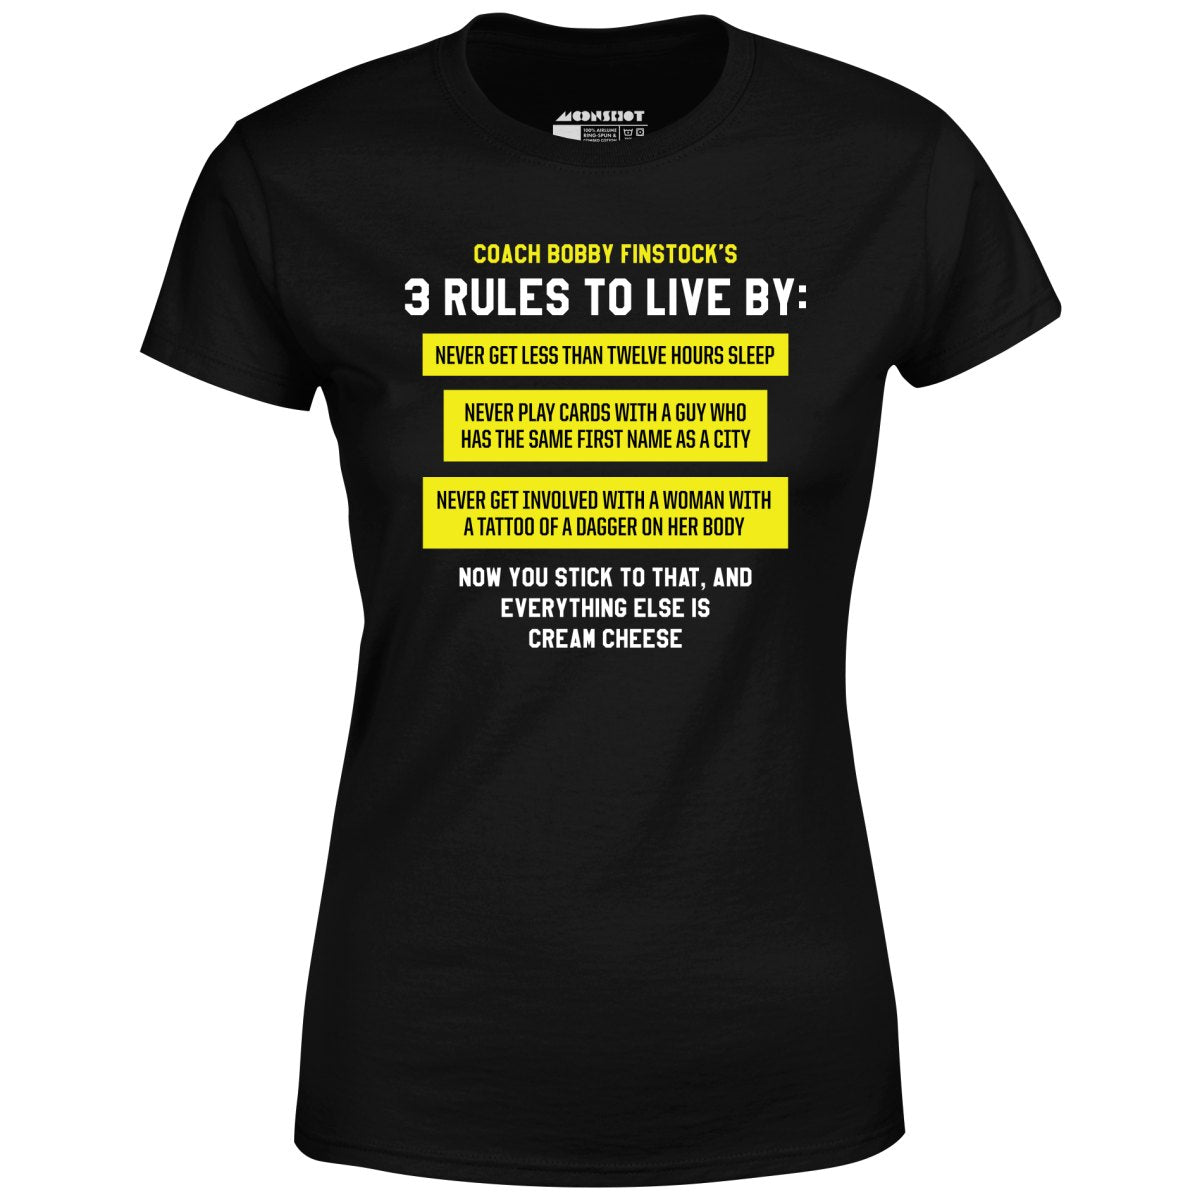 Coach Bobby Finstock's 3 Rules to Live By - Women's T-Shirt